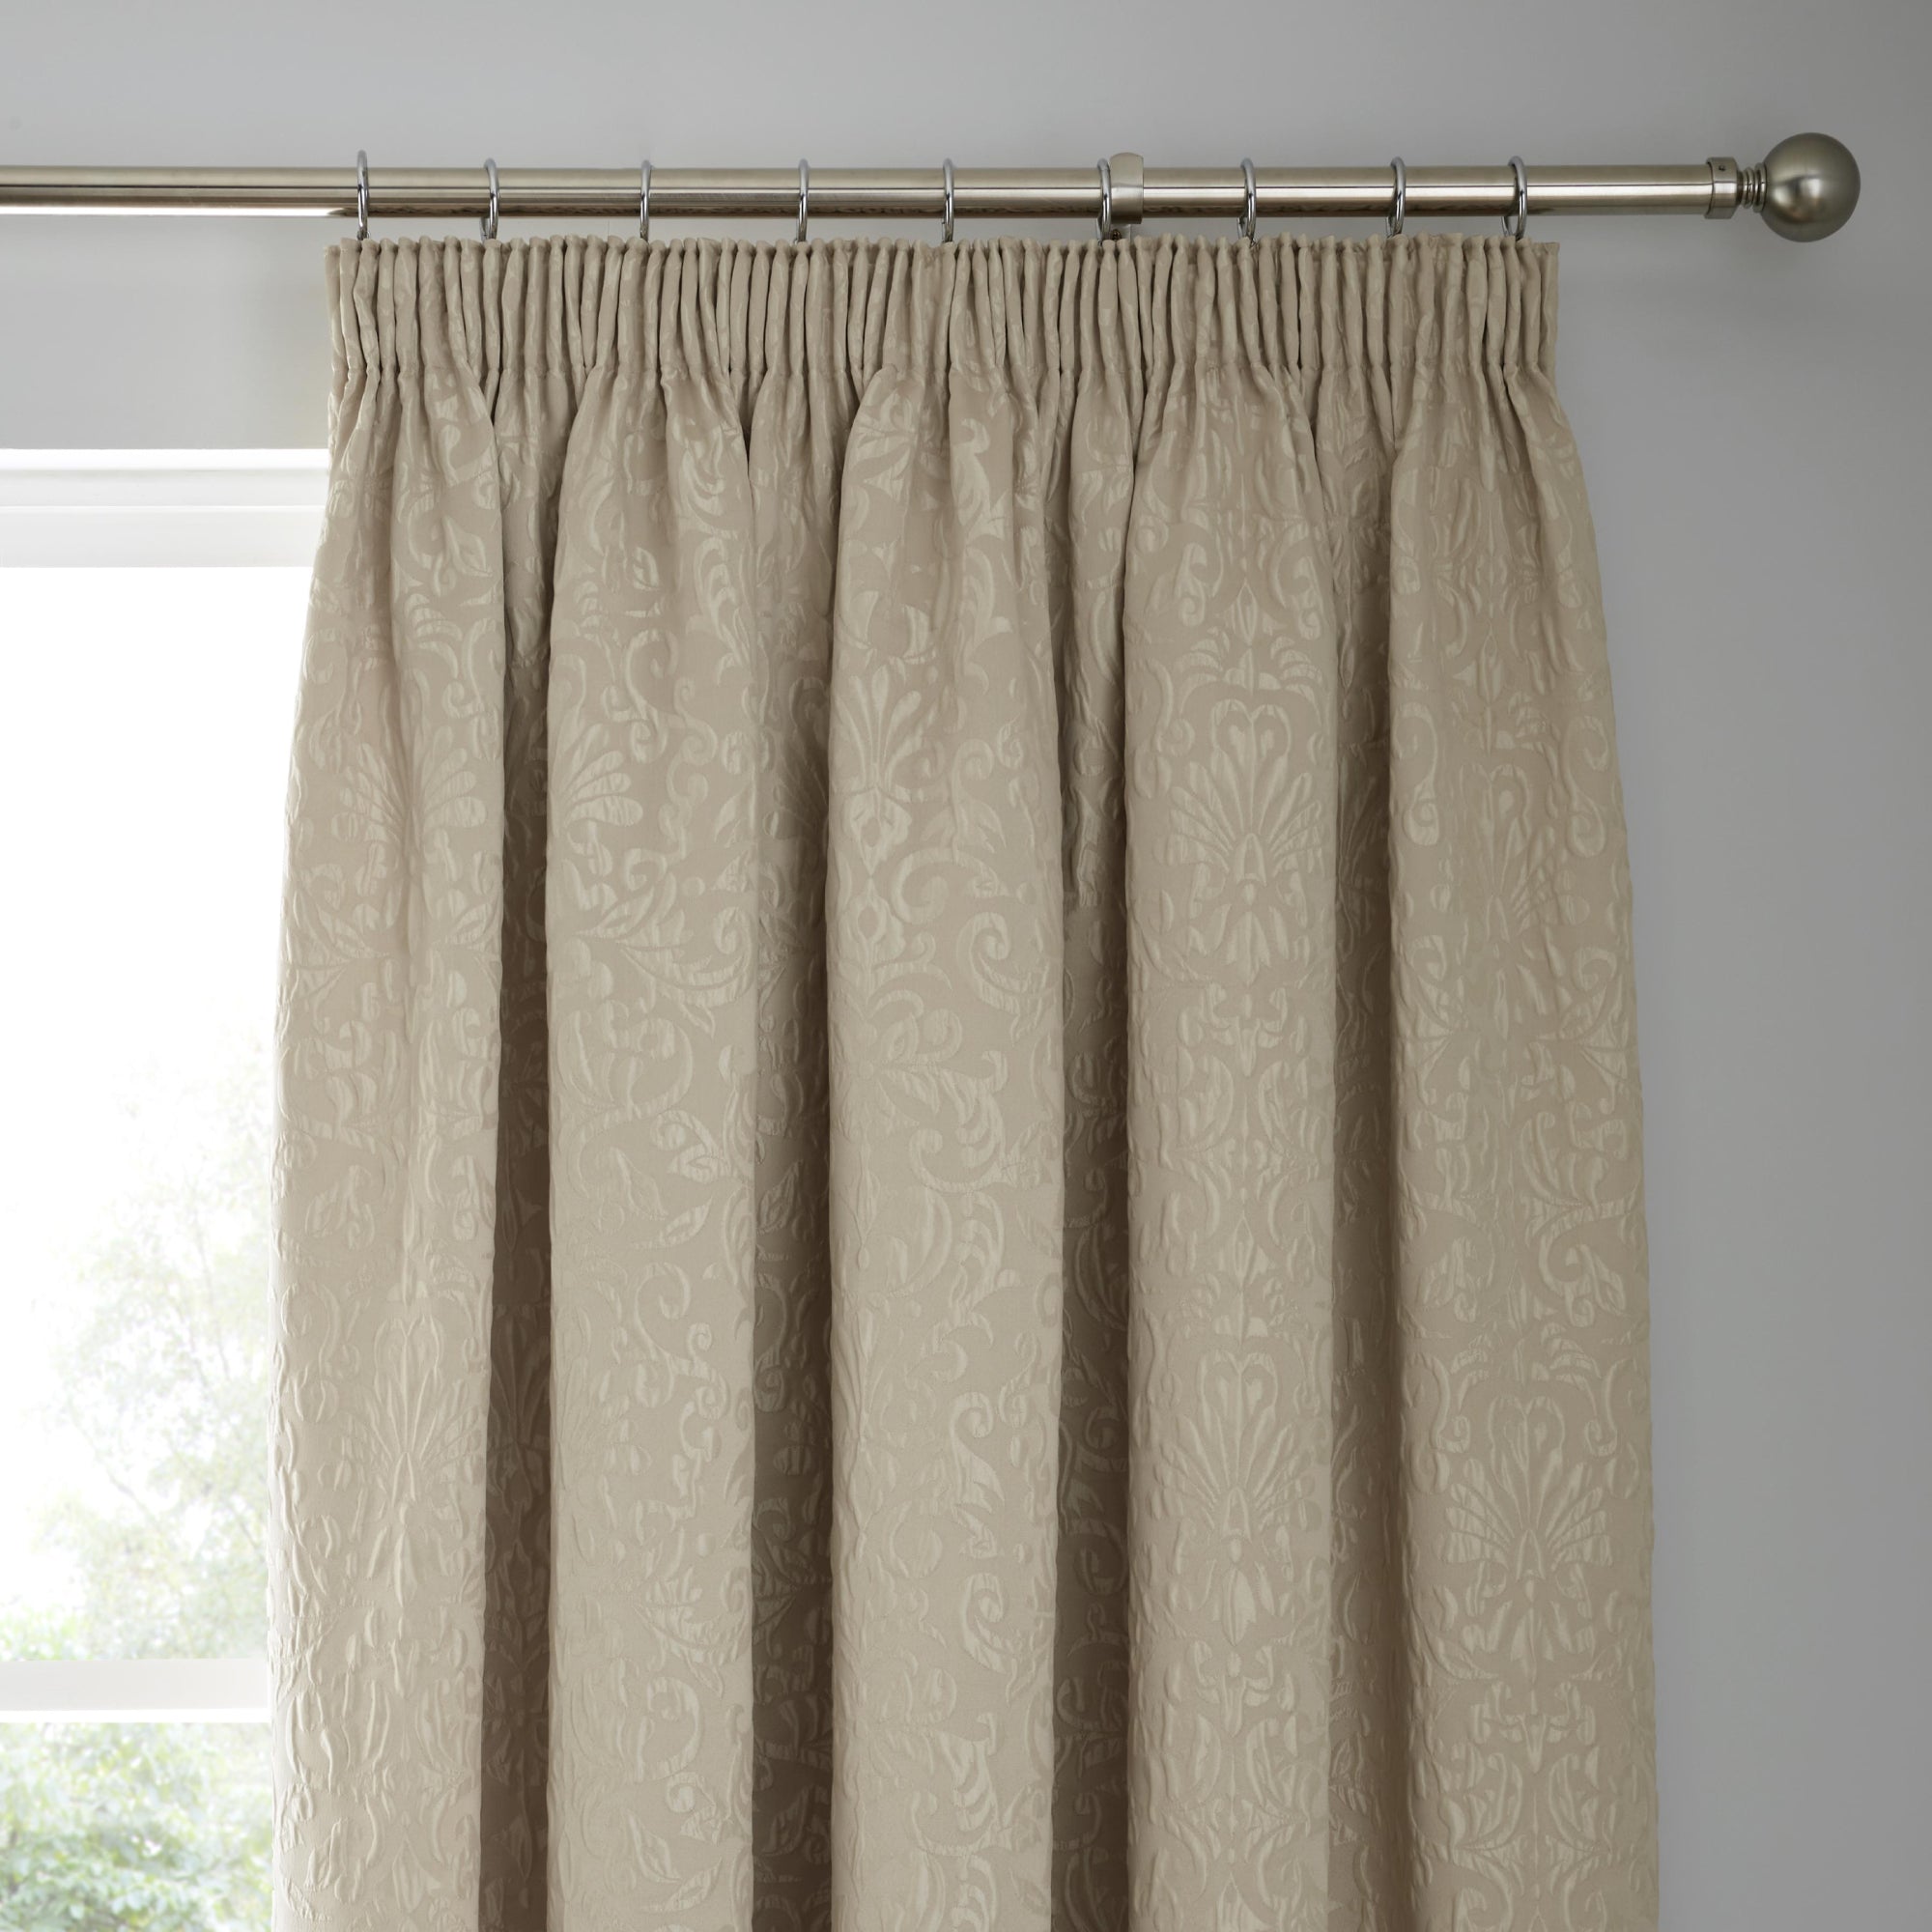 Pair of Pencil Pleat Curtains Lamina by Curtina in Natural